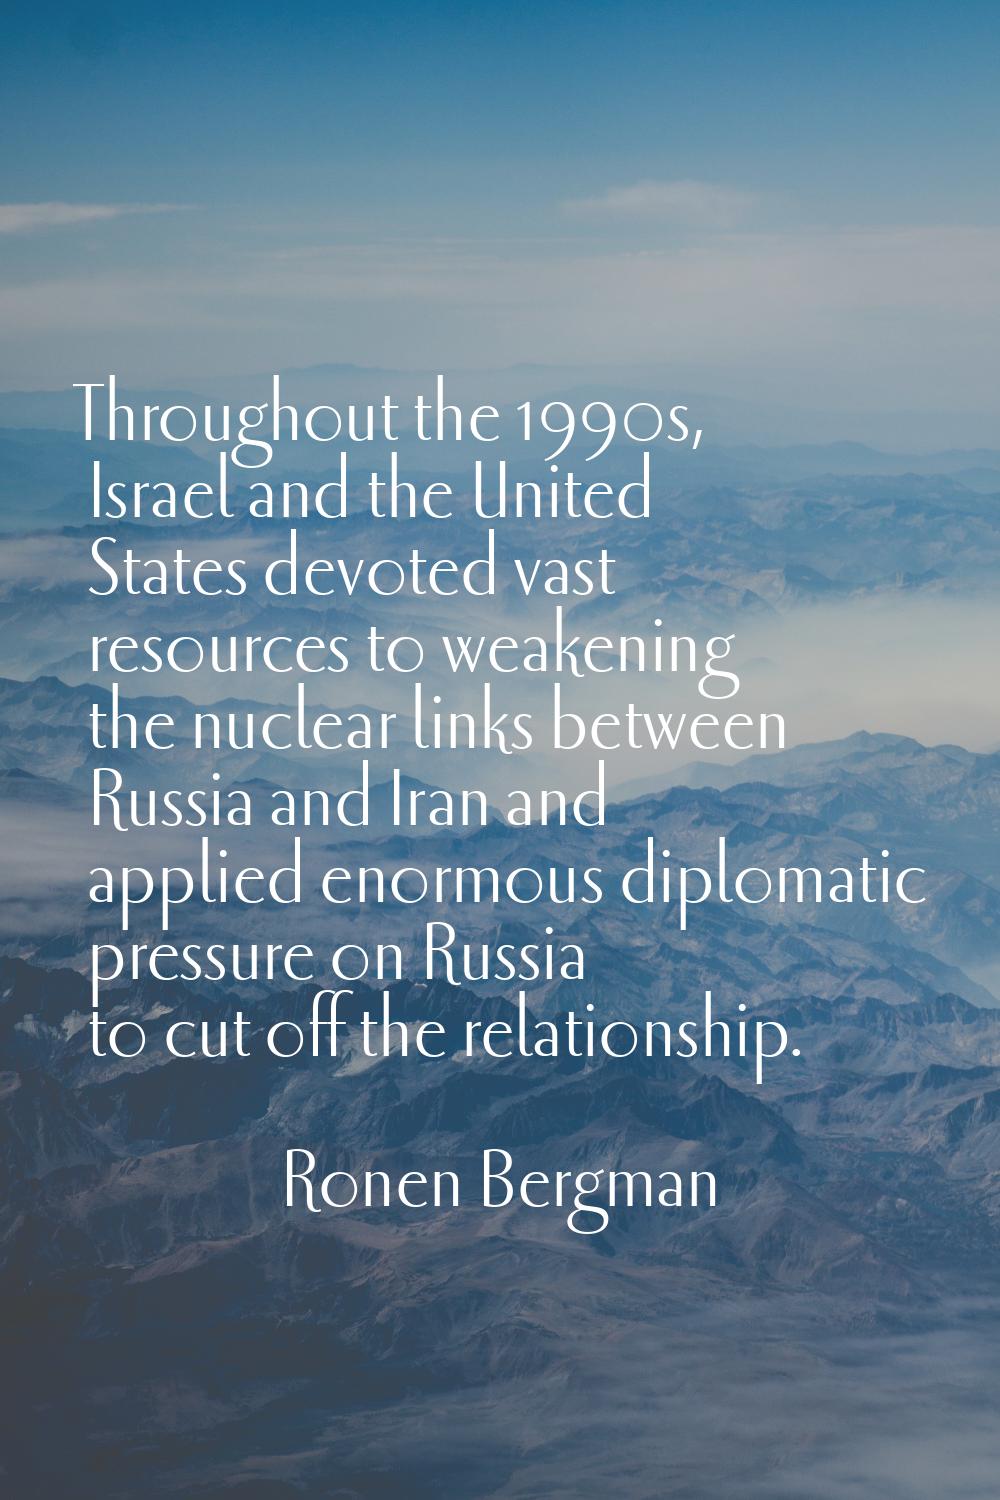 Throughout the 1990s, Israel and the United States devoted vast resources to weakening the nuclear 